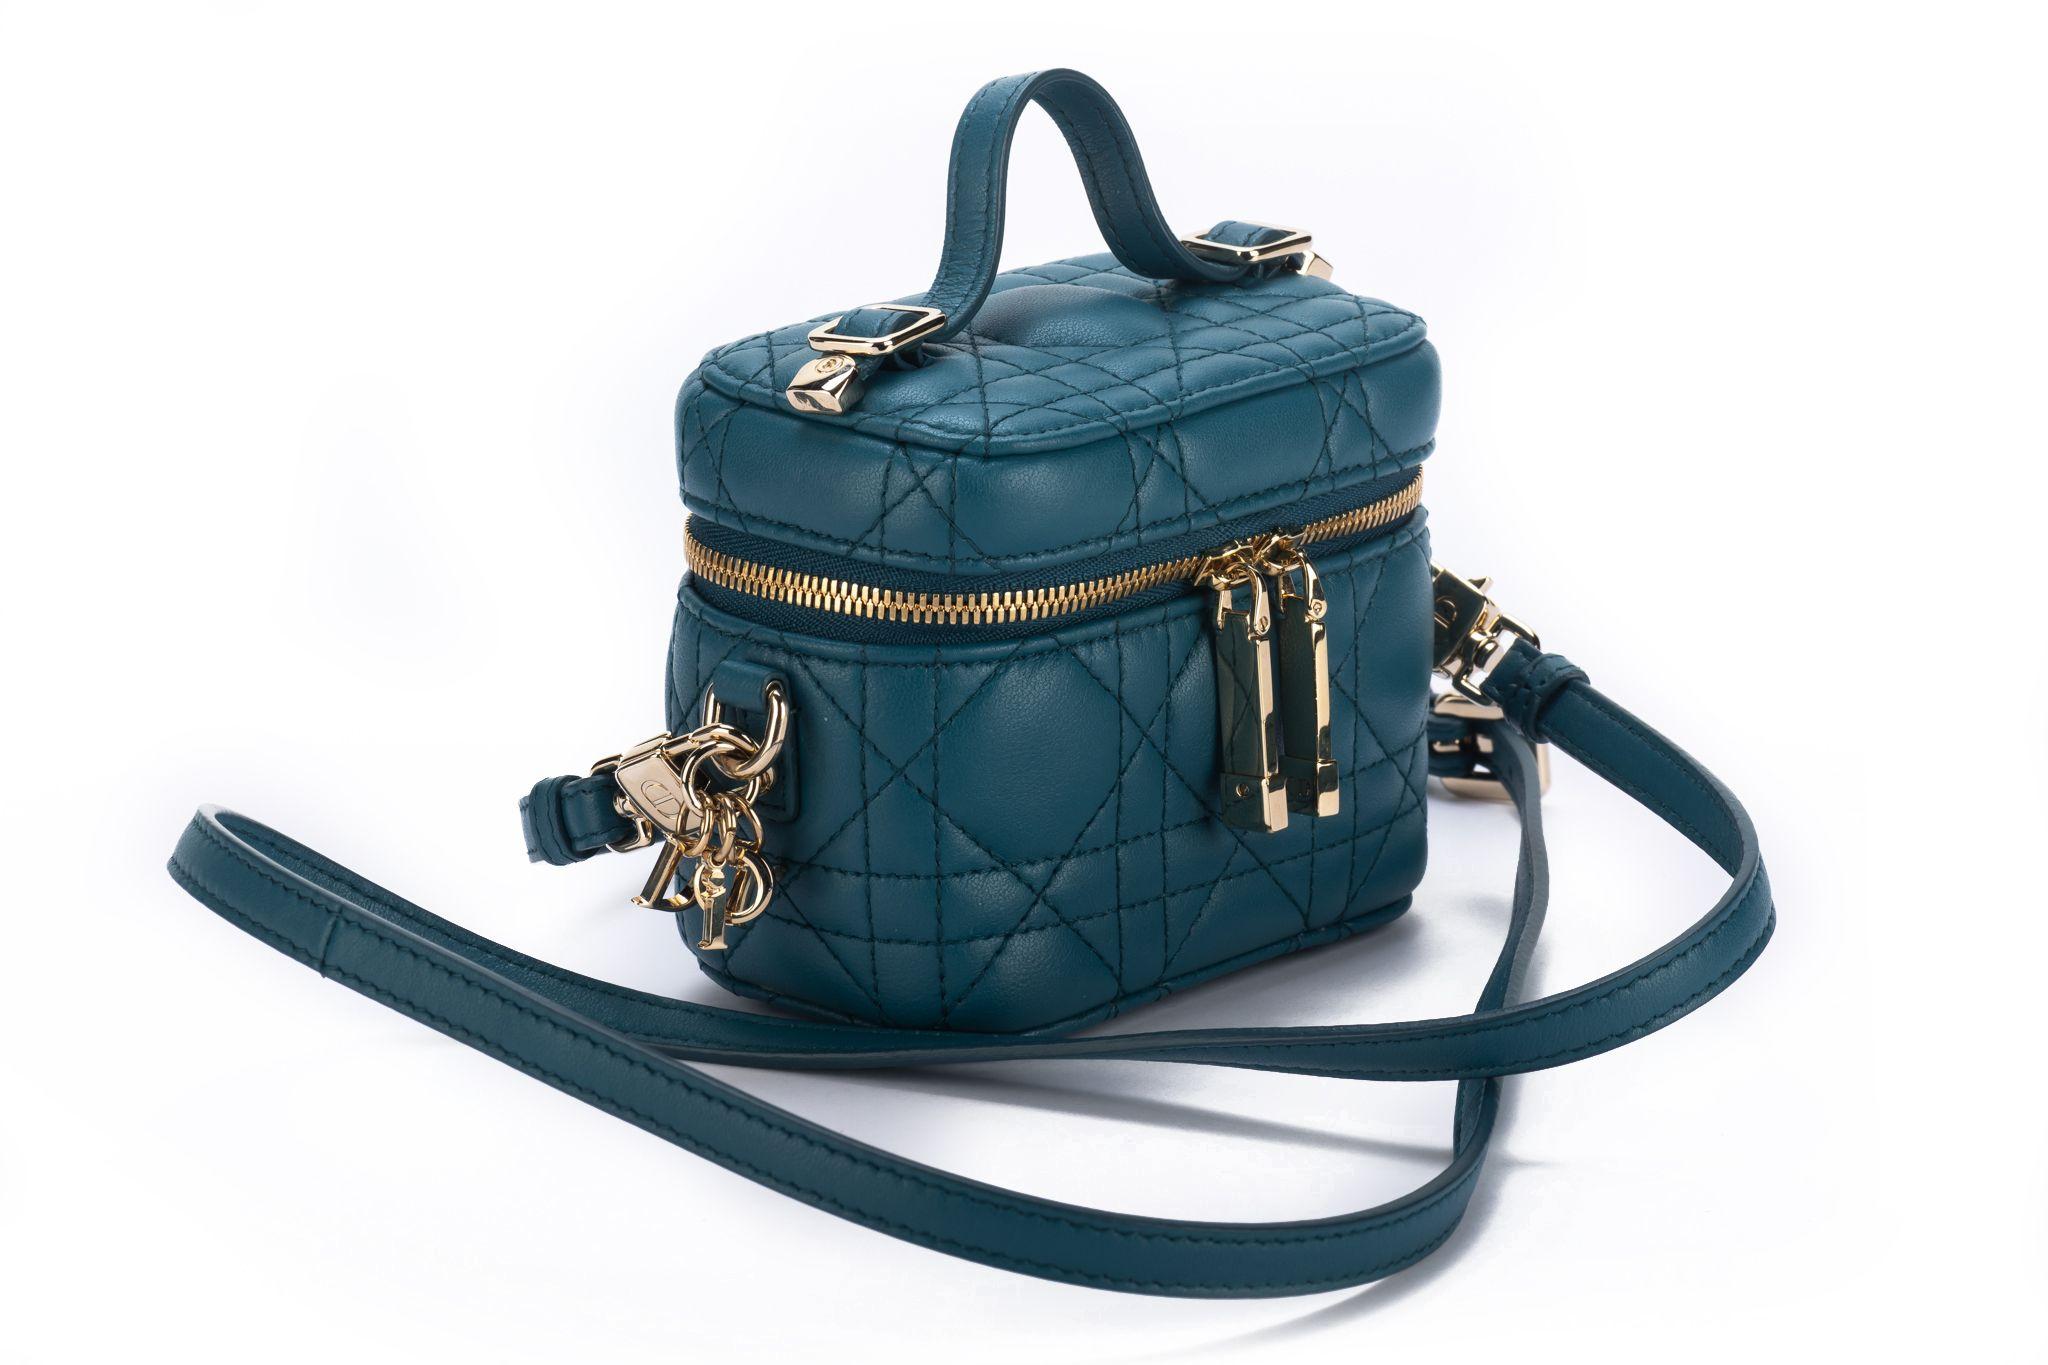 Dior mini travel case in turquoise can age quilted leather and gold tone hardware. Handle drop 1.5, shoulder drop 21. Comes with ID card and original dust cover.